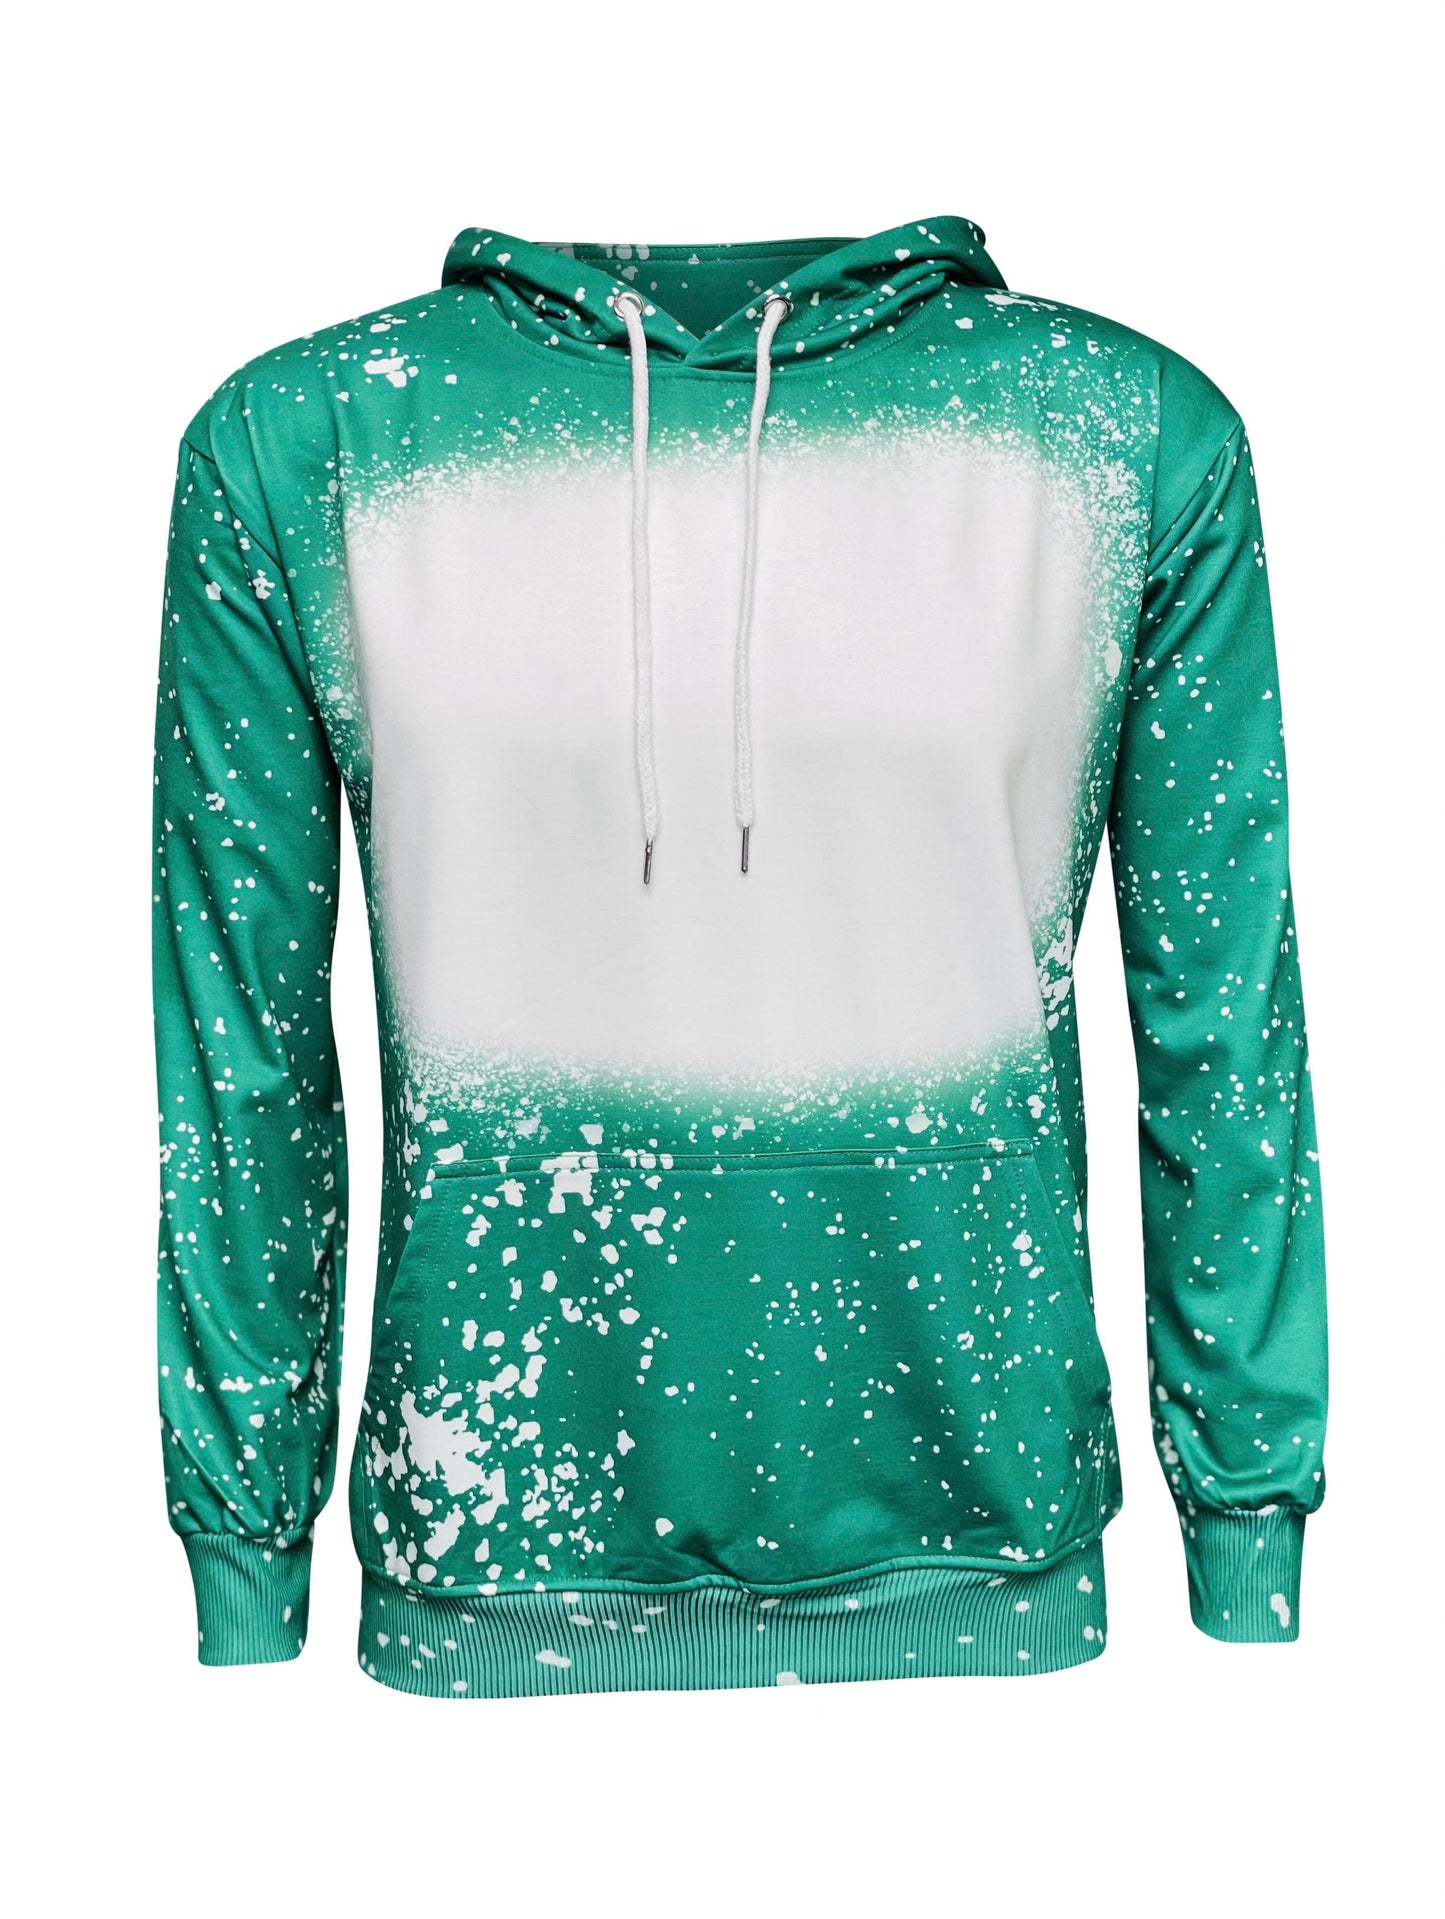 Texas Sublimation Hoodie